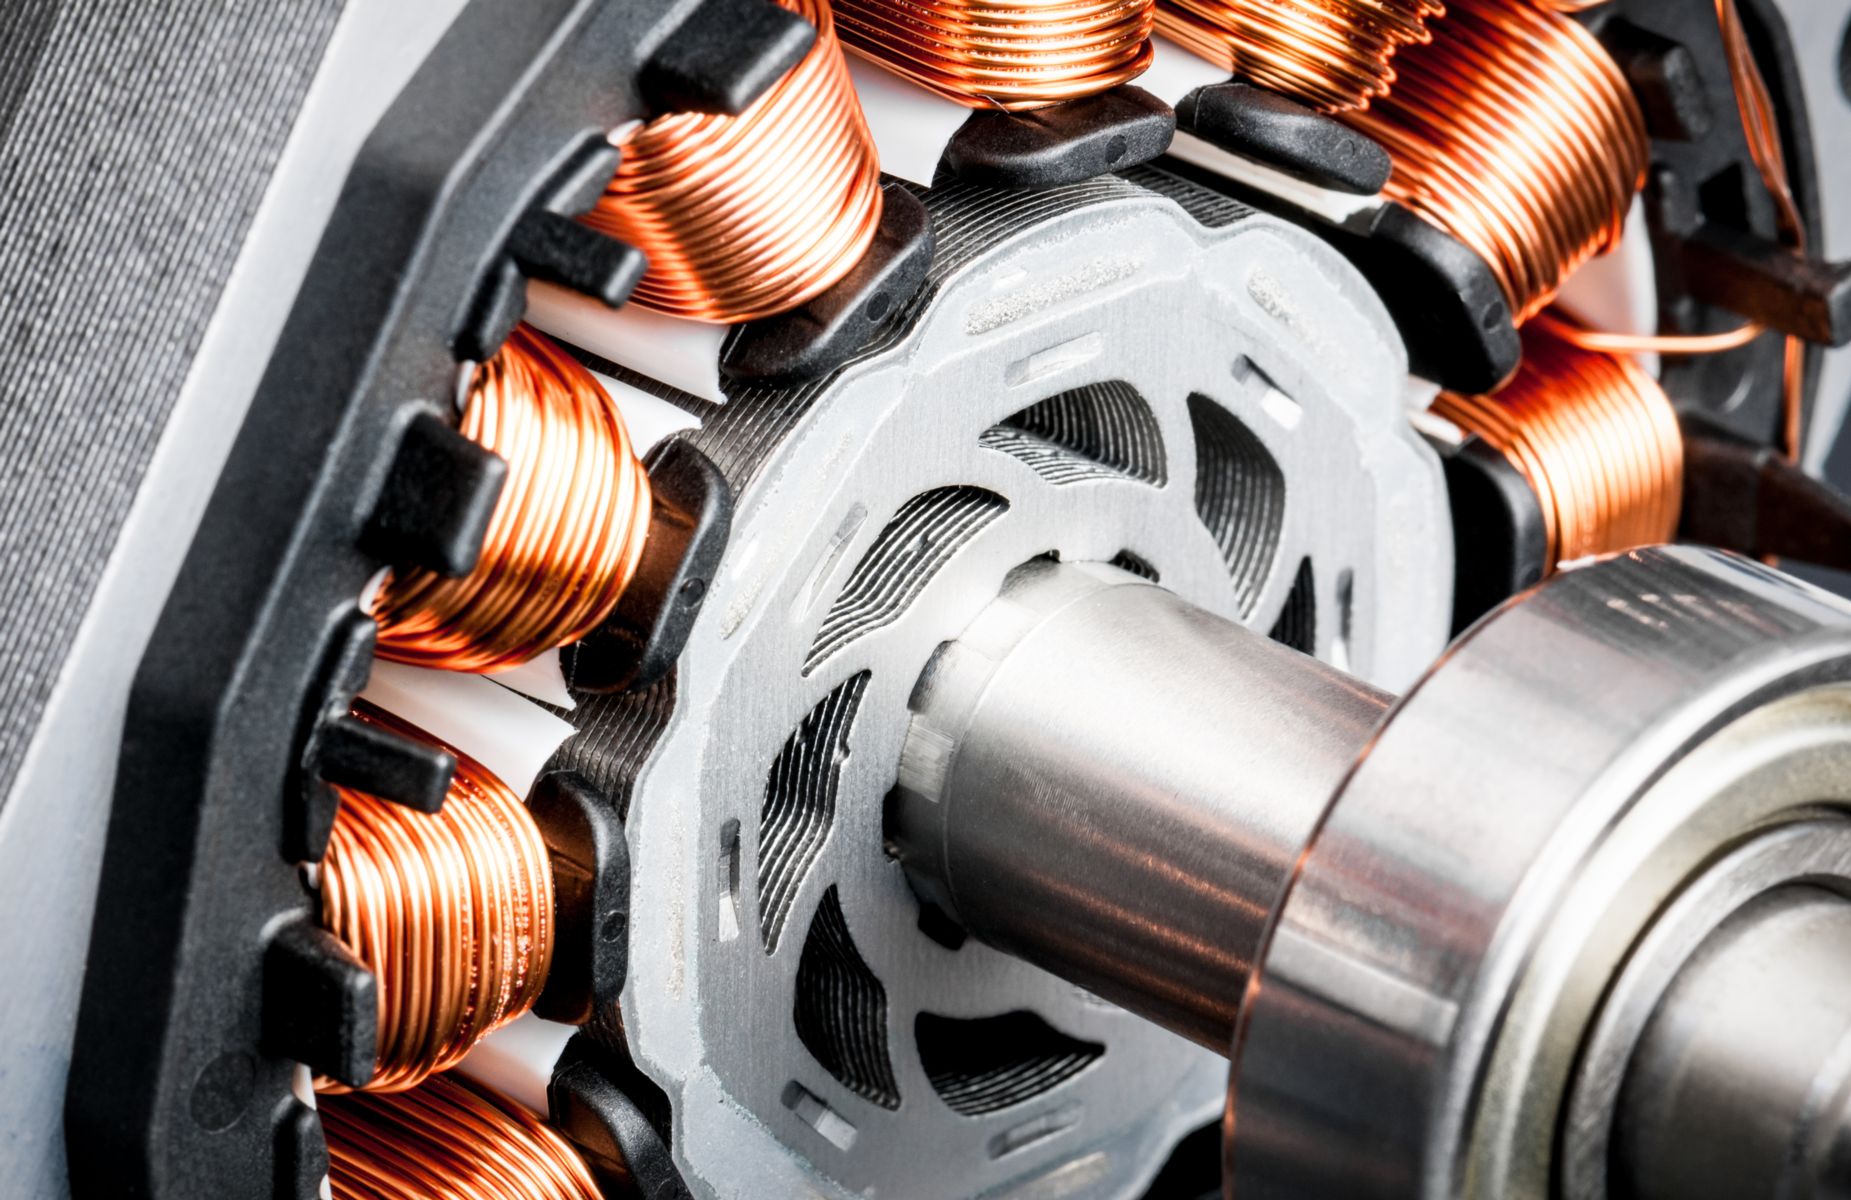 Electric motor: what is the real innovation? - Electric Motor Engineering